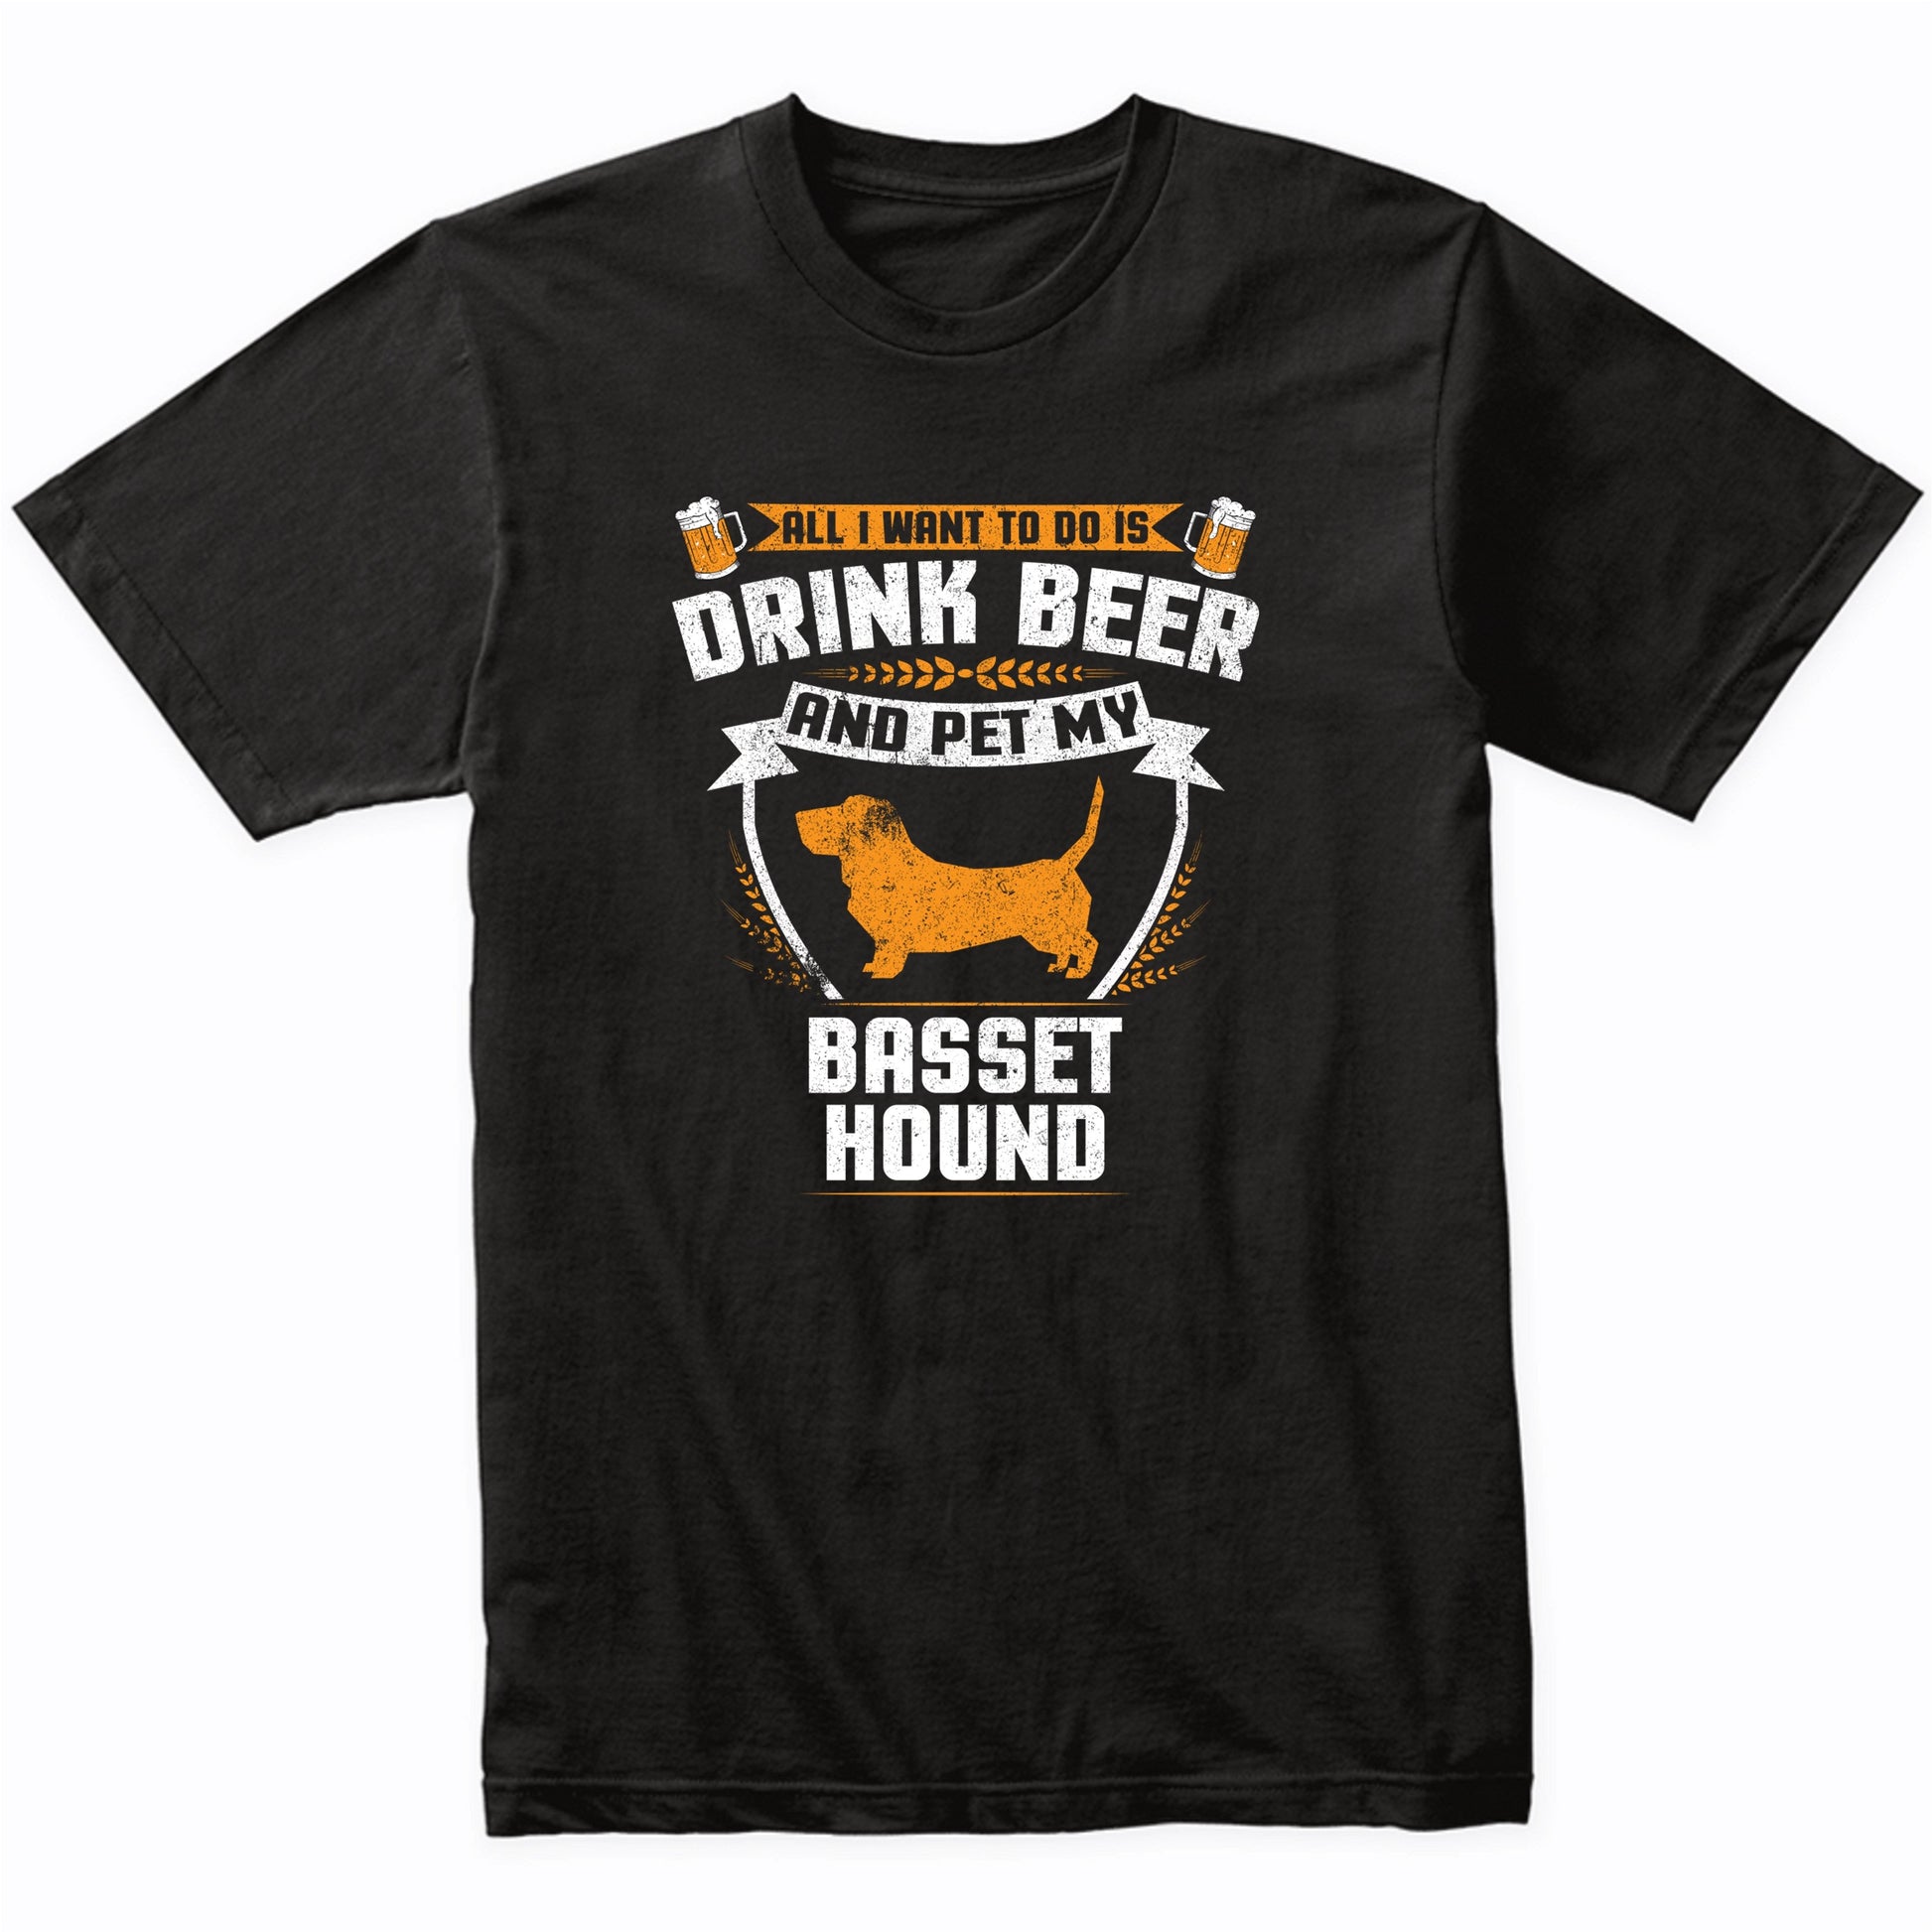 All I Want To Do Is Drink Beer And Pet My Basset Hound Funny Dog Owner Shirt